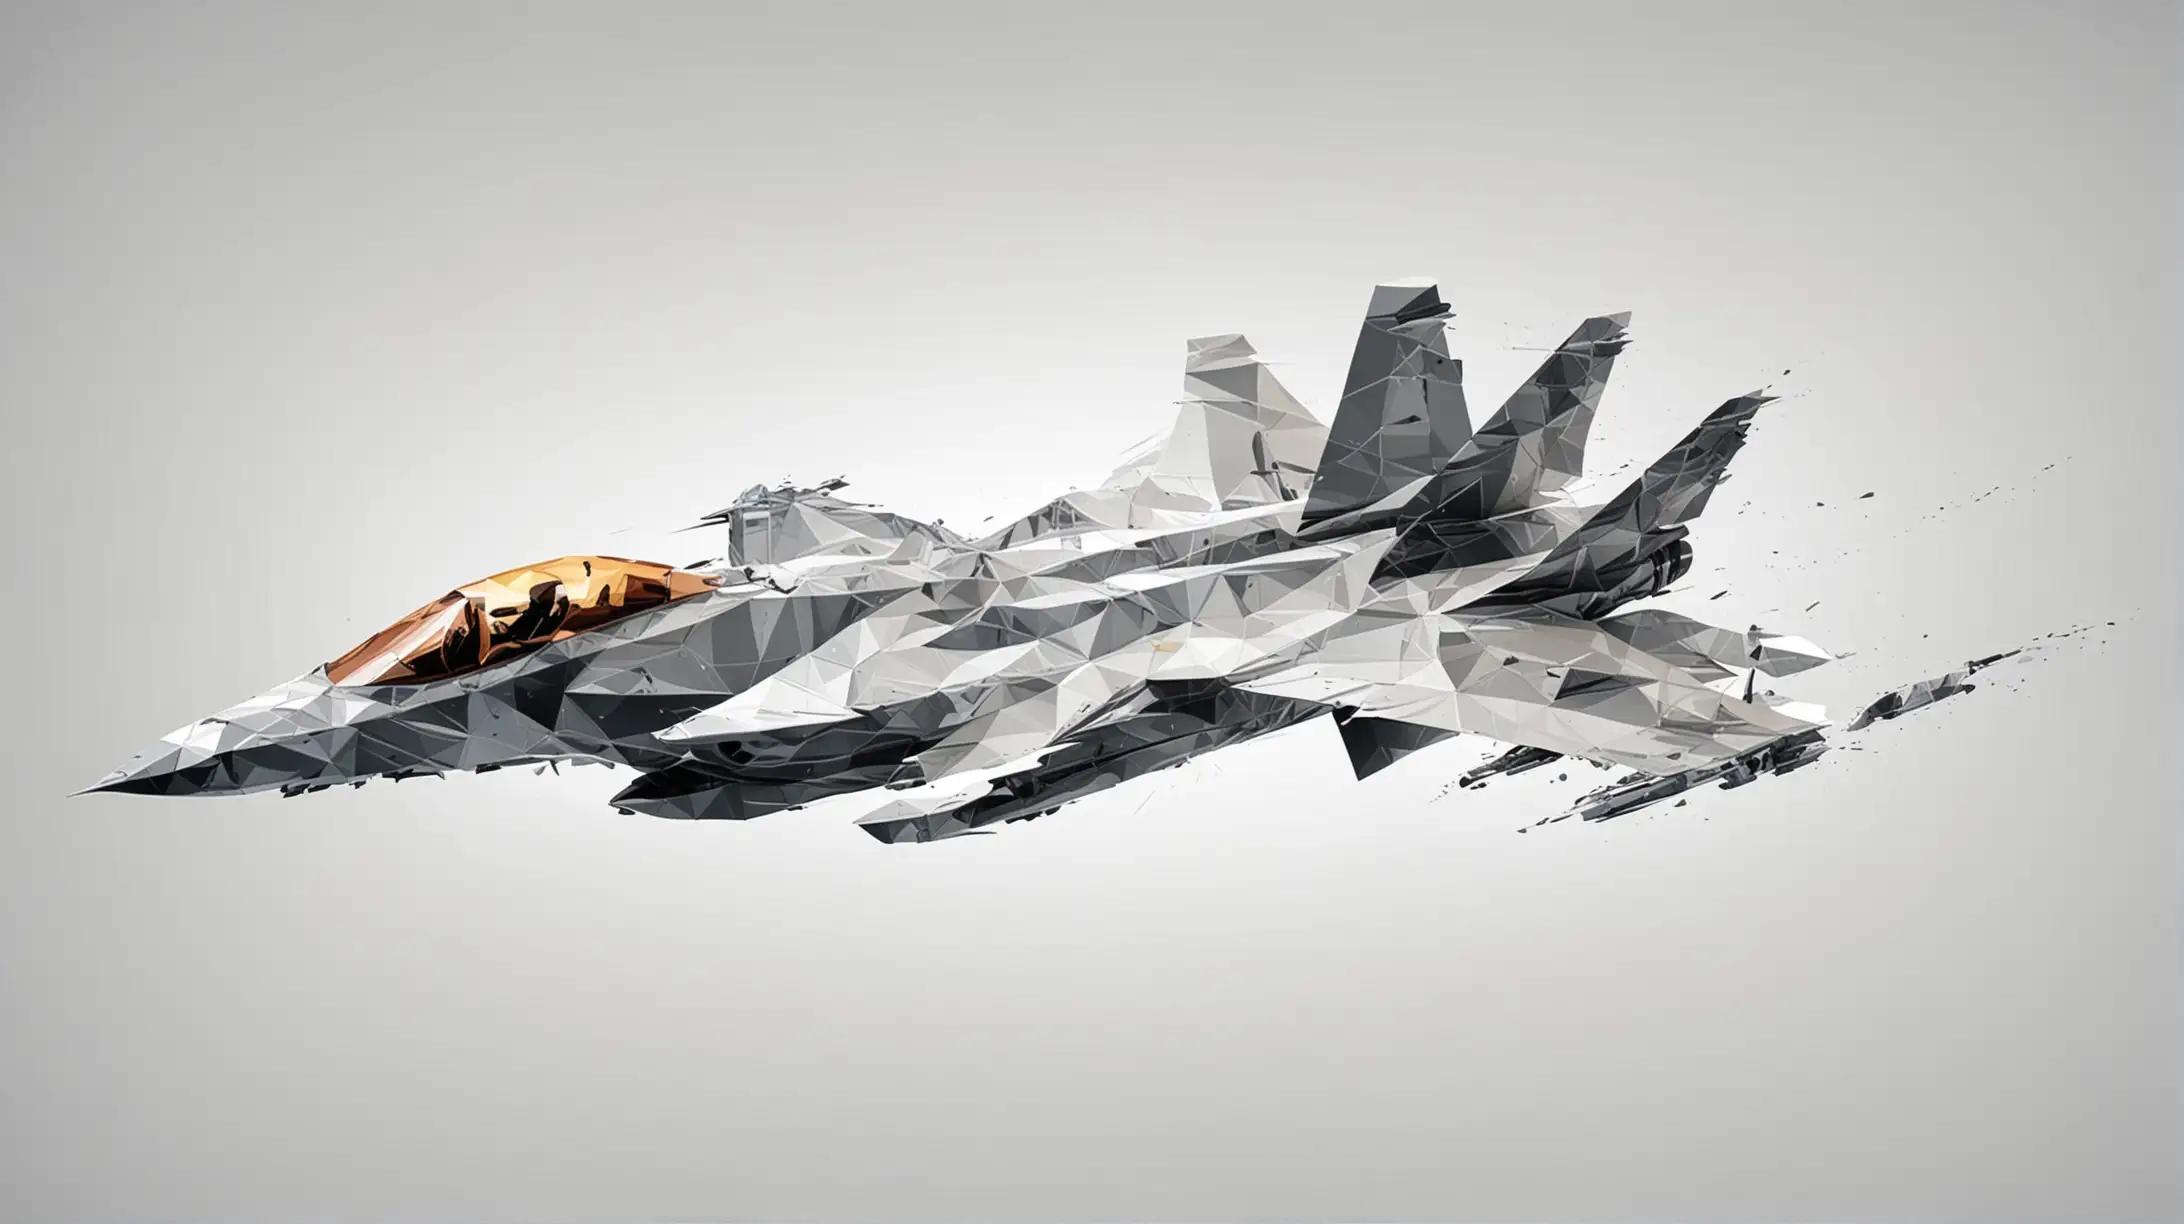 Abstract Polygon Fighter Jet Artwork on White Background